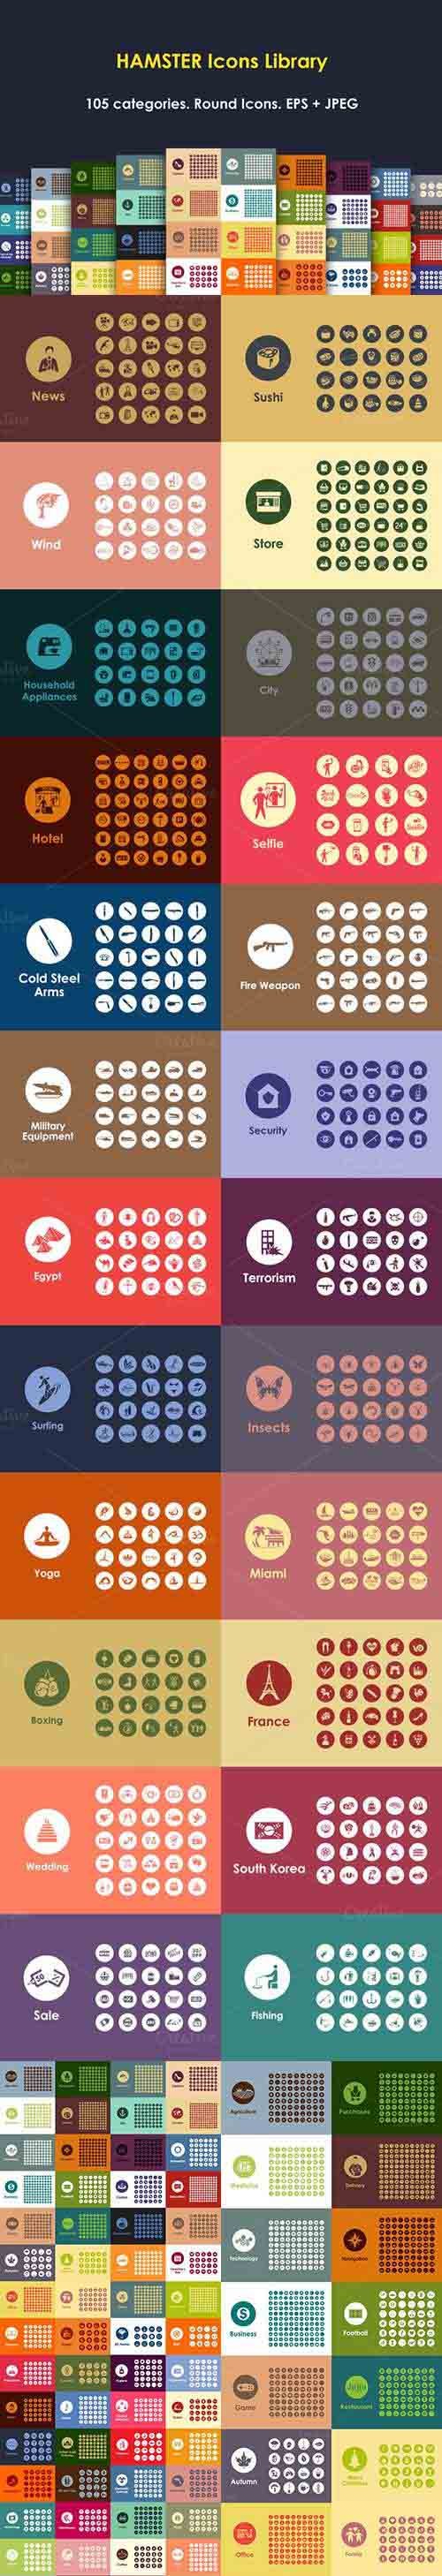 CM - HAMSTER Round Icons Library 462471